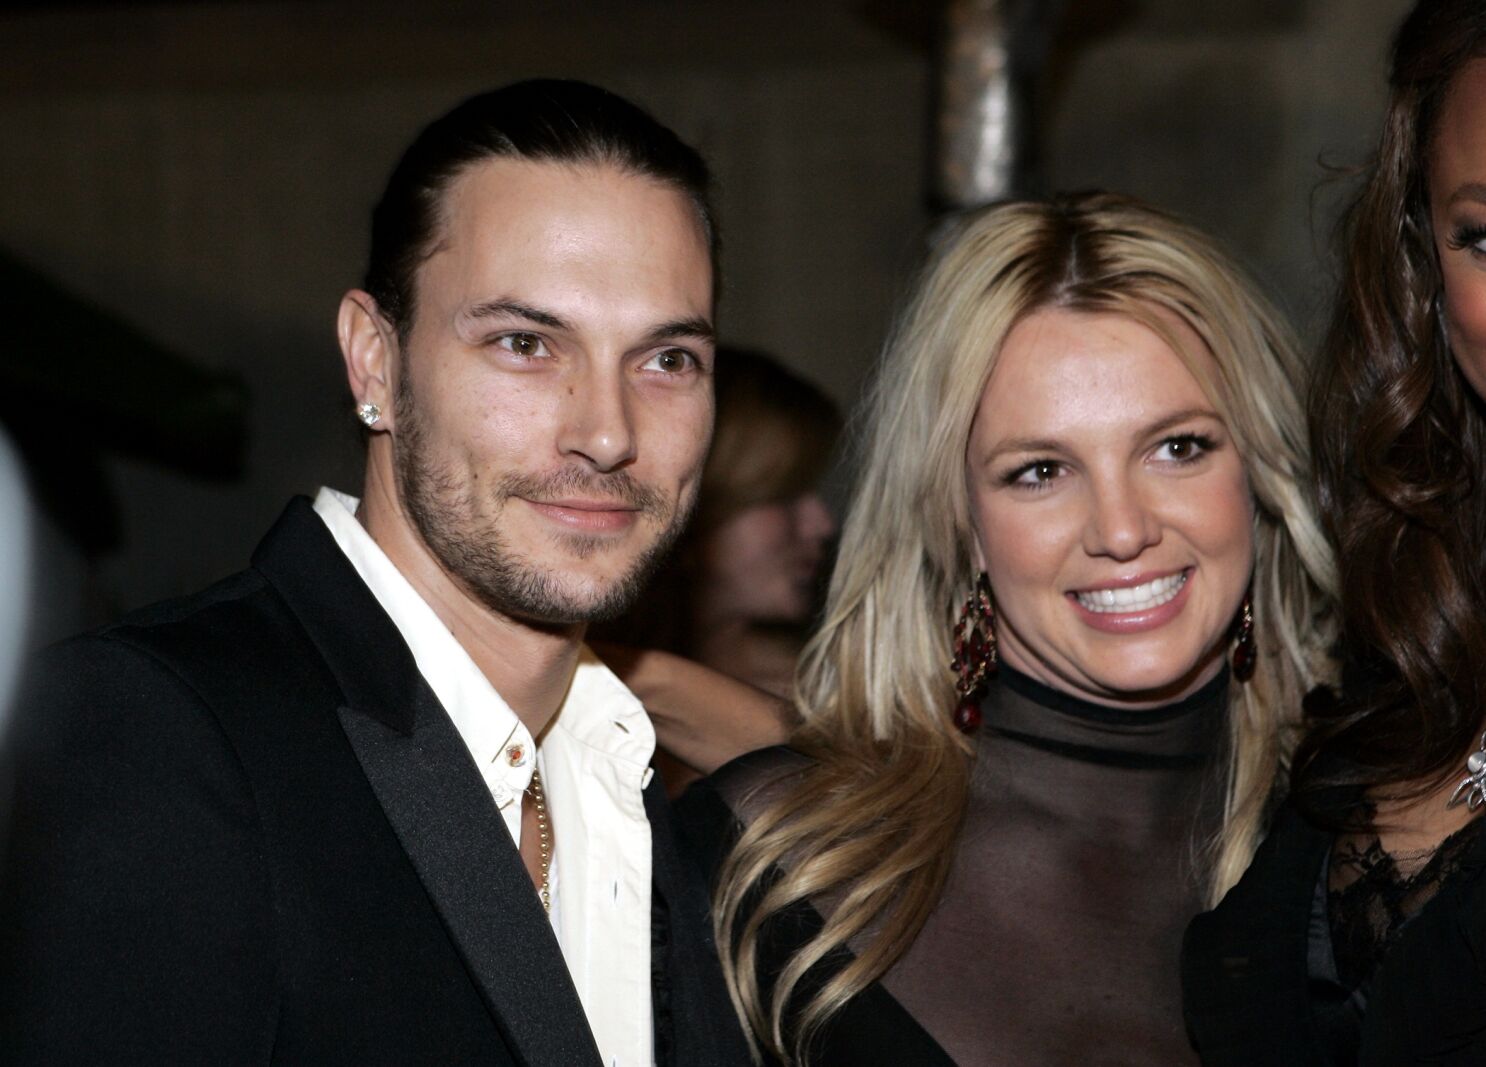 Kevin Federline Won’t Force Sons to See Britney Spears Before Hawaii Move: Report